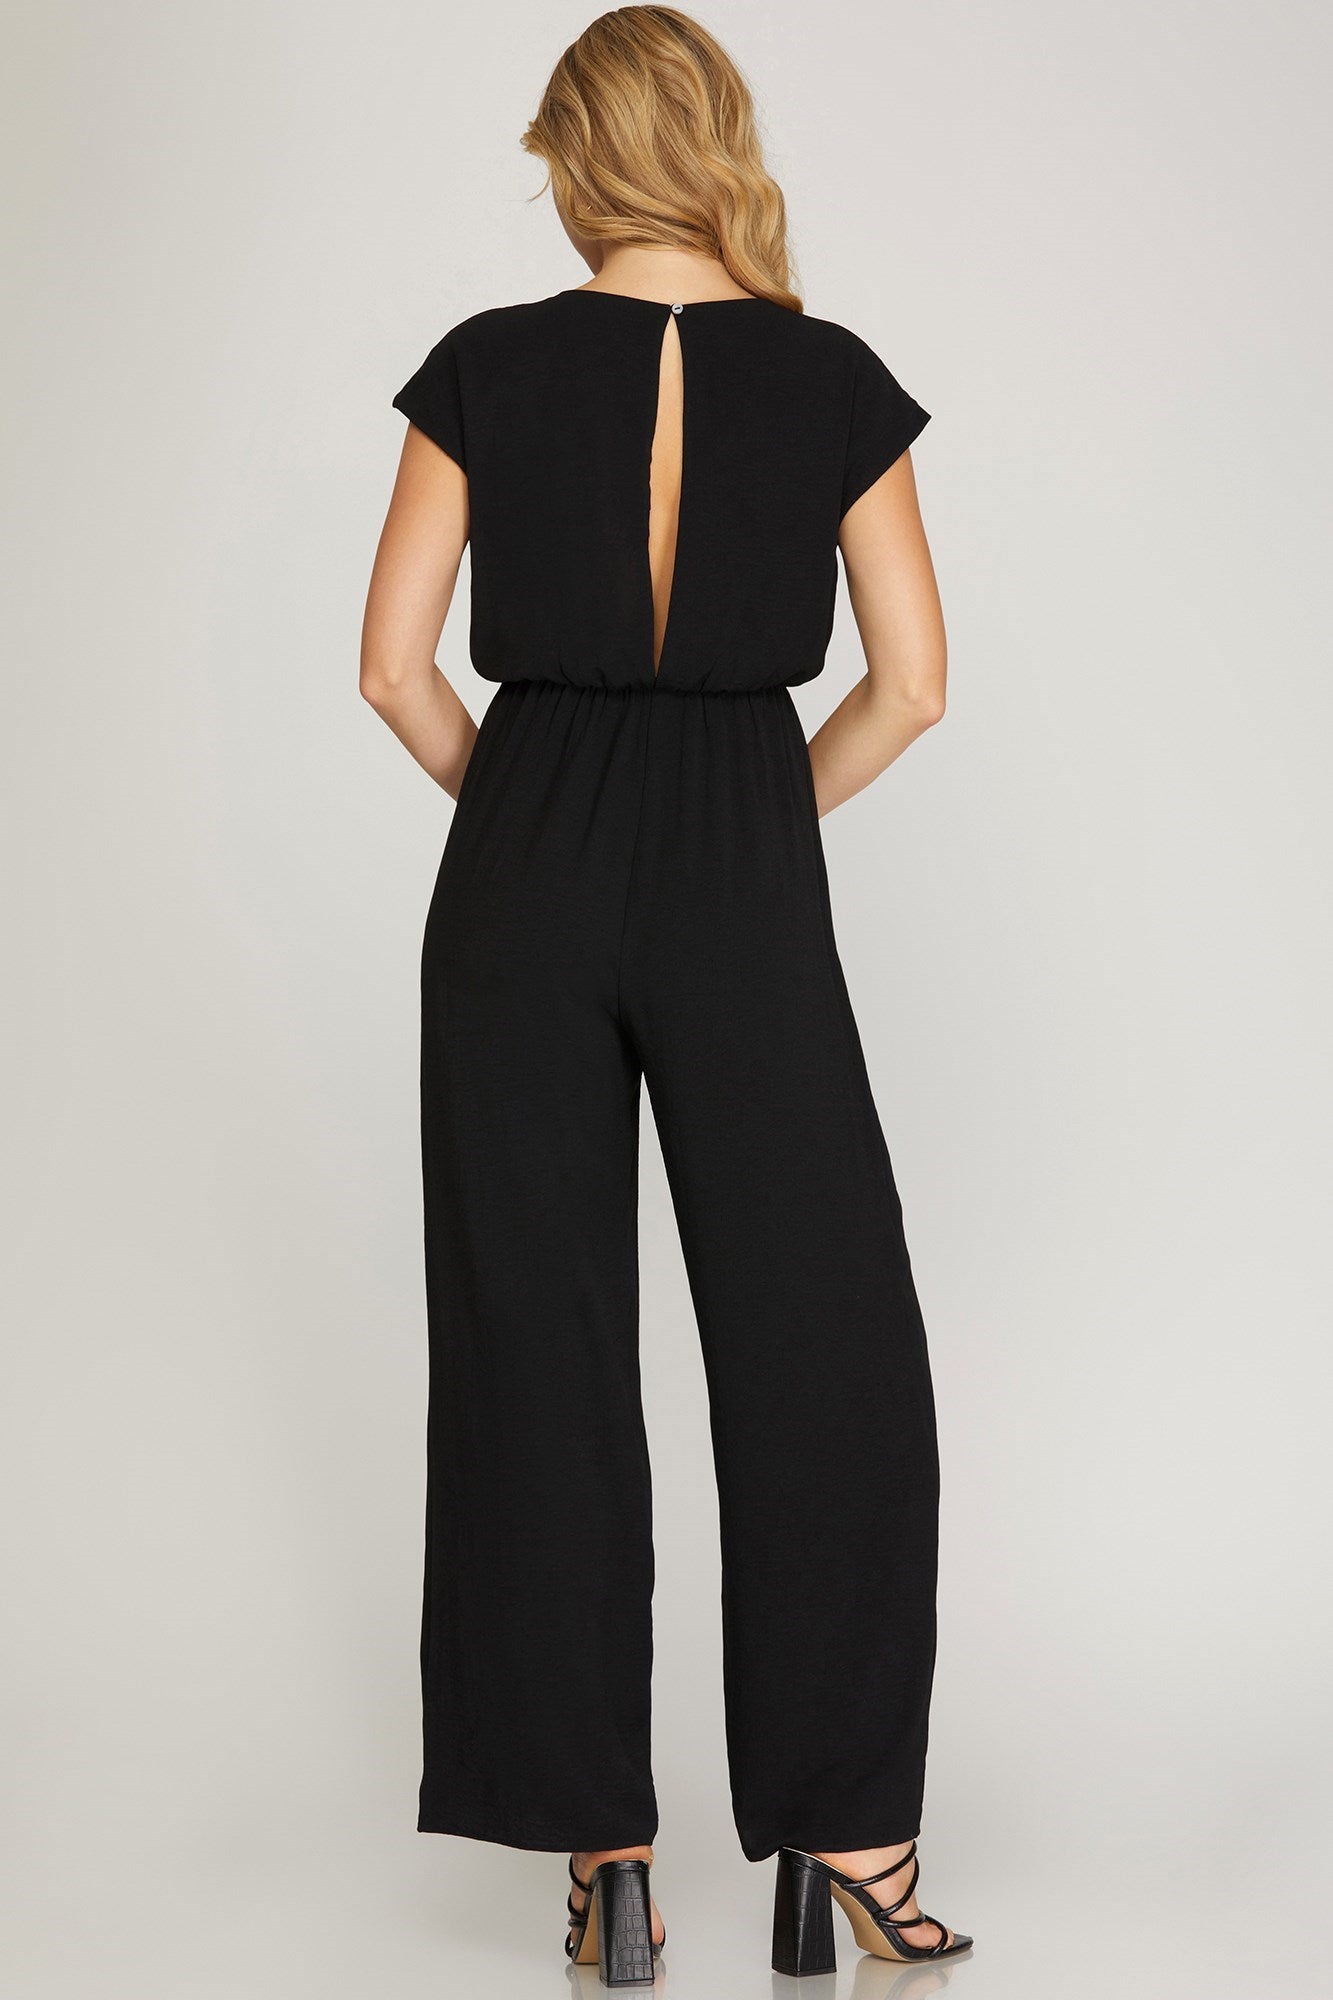 SHE AND SKY Women's Jumpsuit Short Sleeve Woven Jumpsuit || David's Clothing